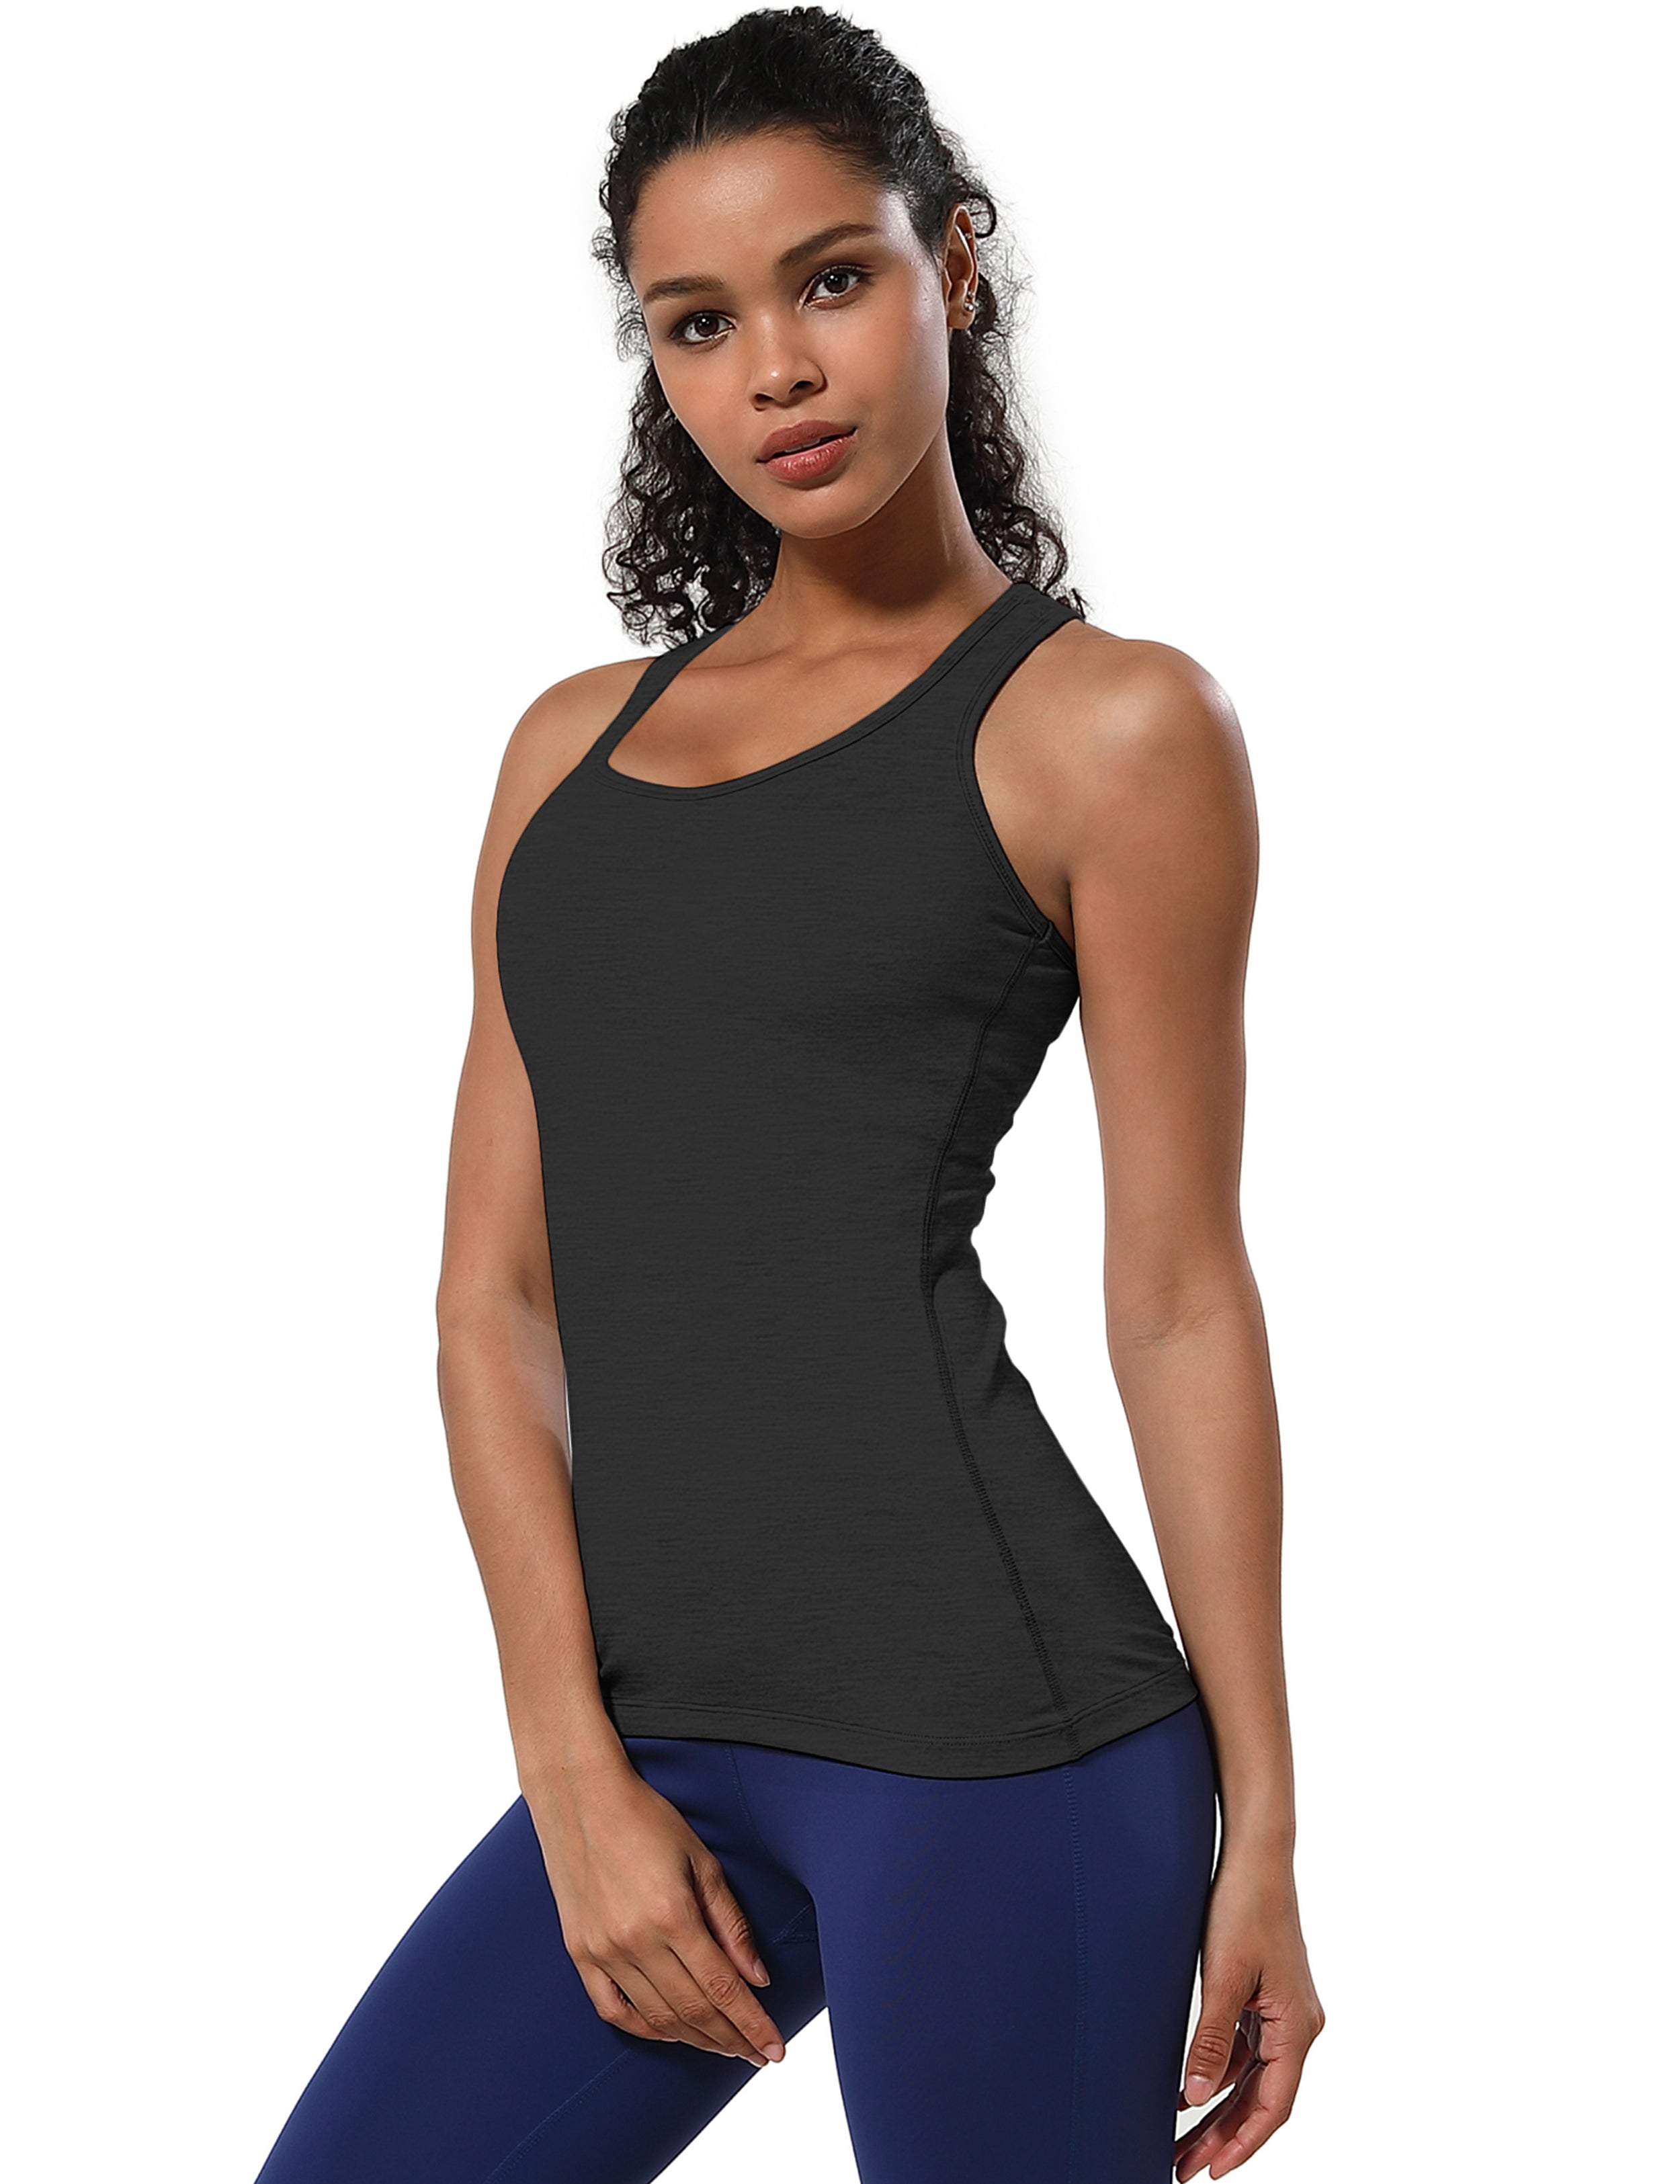 Racerback Athletic Tank Tops heathercharcoal 92%Nylon/8%Spandex(Cotton Soft) Designed for Pilates Tight Fit So buttery soft, it feels weightless Sweat-wicking Four-way stretch Breathable Contours your body Sits below the waistband for moderate, everyday coverage